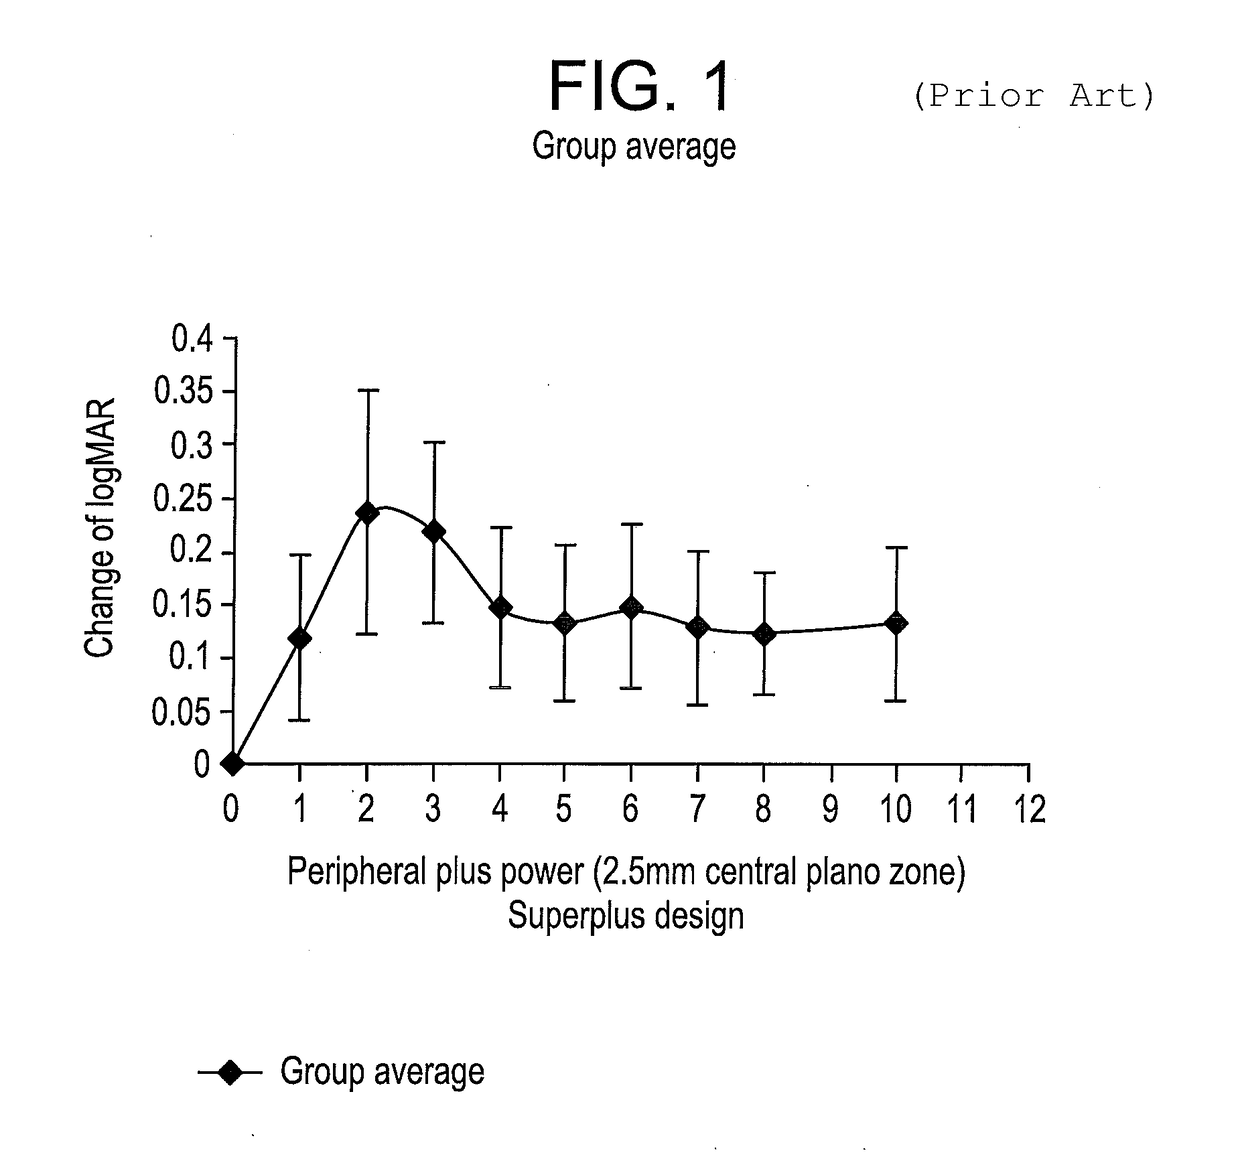 High plus treatment zone lens design and method for preventing and/or slowing myopia progression